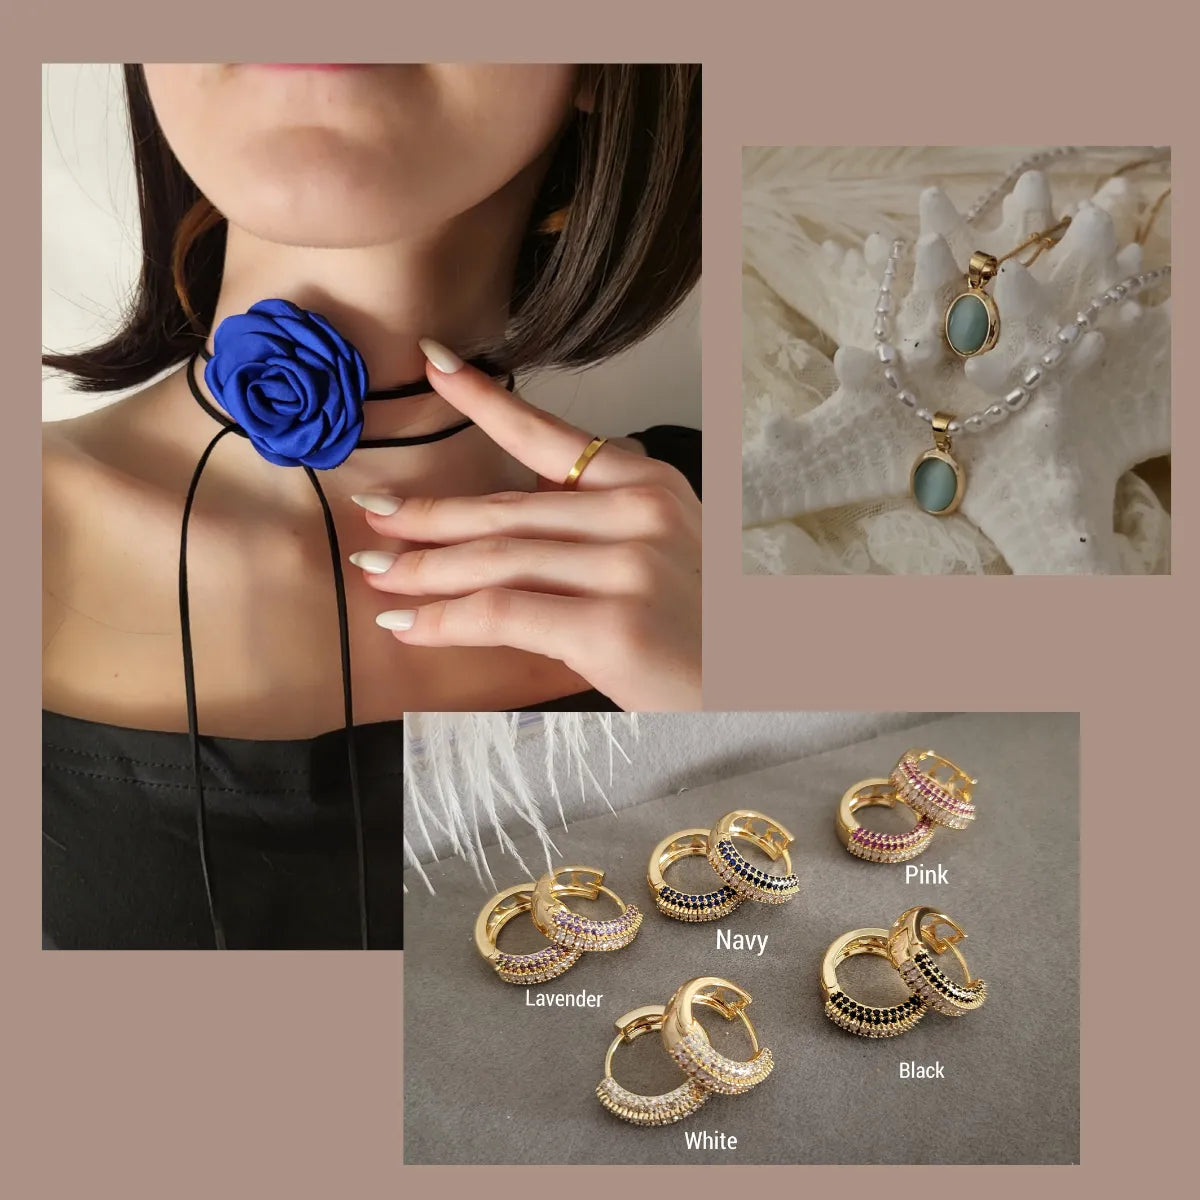 An elegant selection of handmade jewelry items. Represent 3 products. 1st is the Rose ribbon necklace, 2nd is the thelma opal necklace and 3rd is the cz colorful hoops.